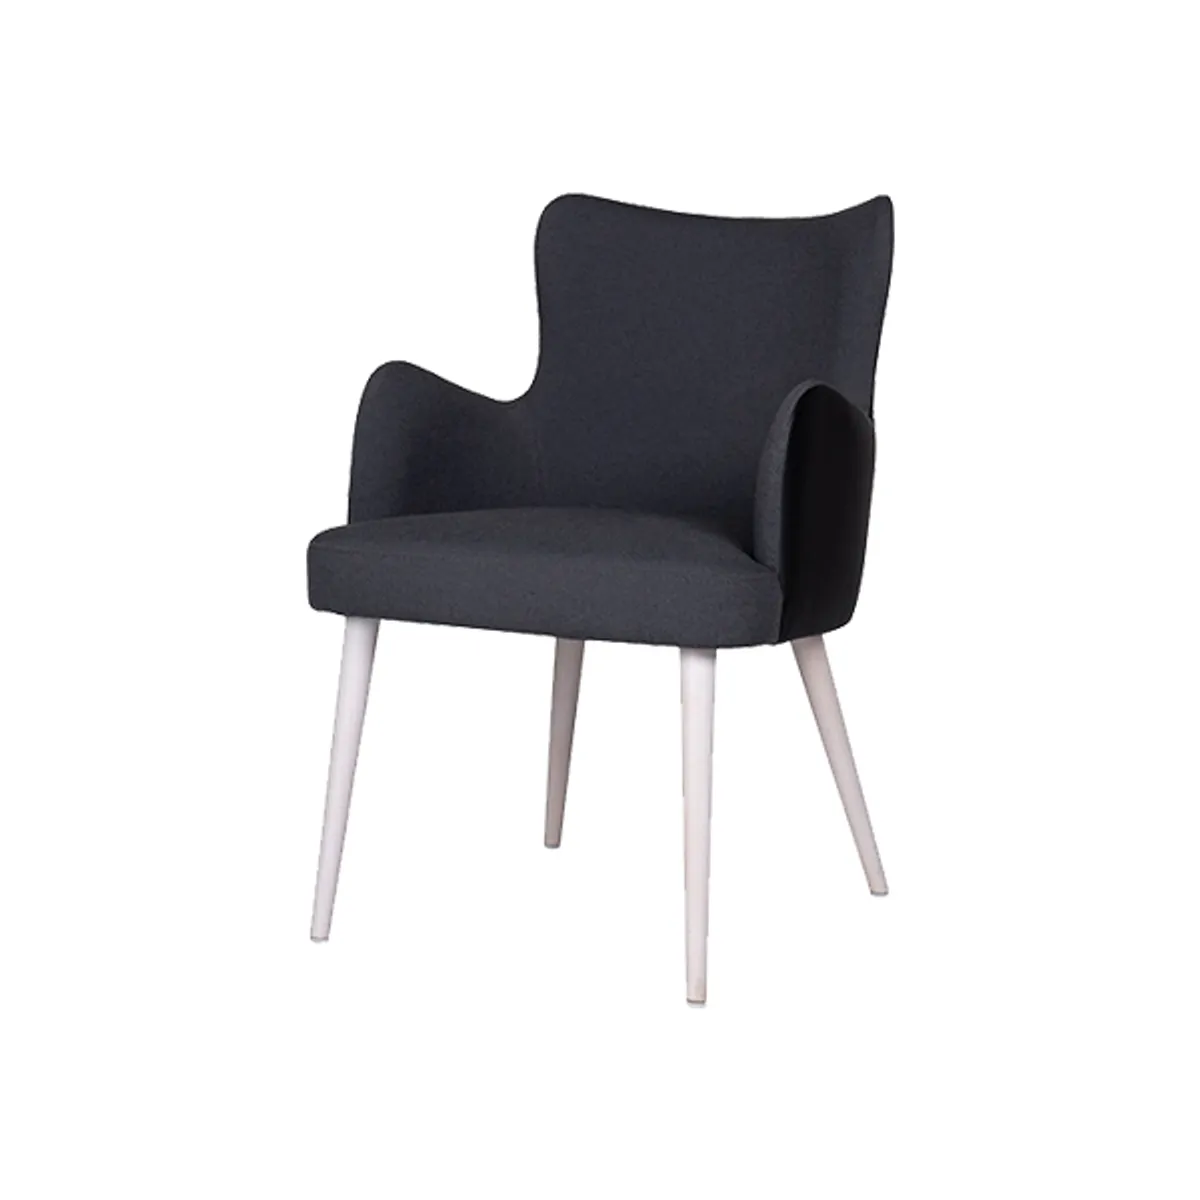 Kelly Flow Armchair Inside Out Contracts